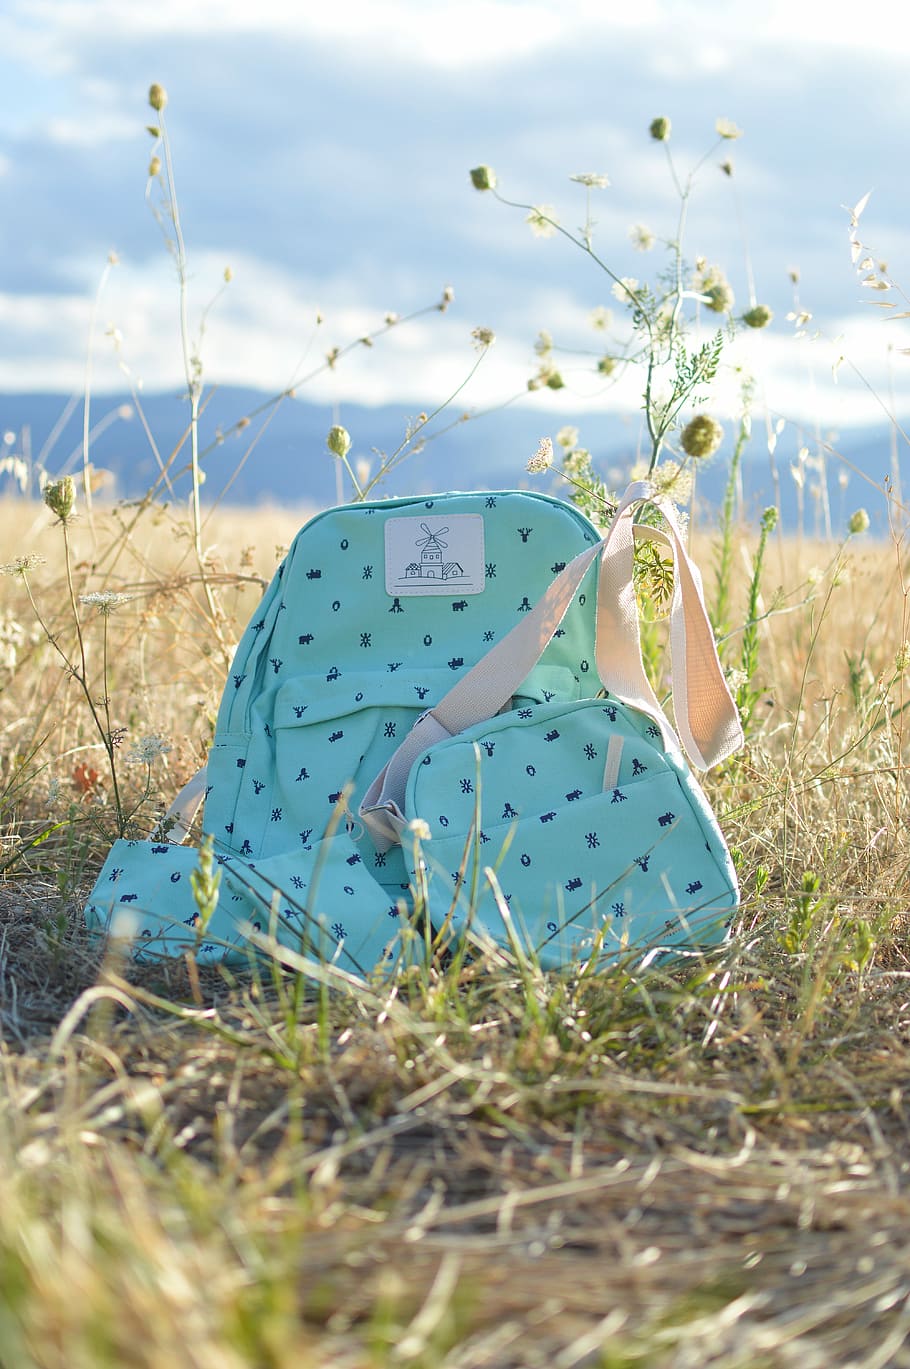 green leather backpack beside crossbody bag on grass field during daytime, teal backpack and crossbody on grass field, HD wallpaper